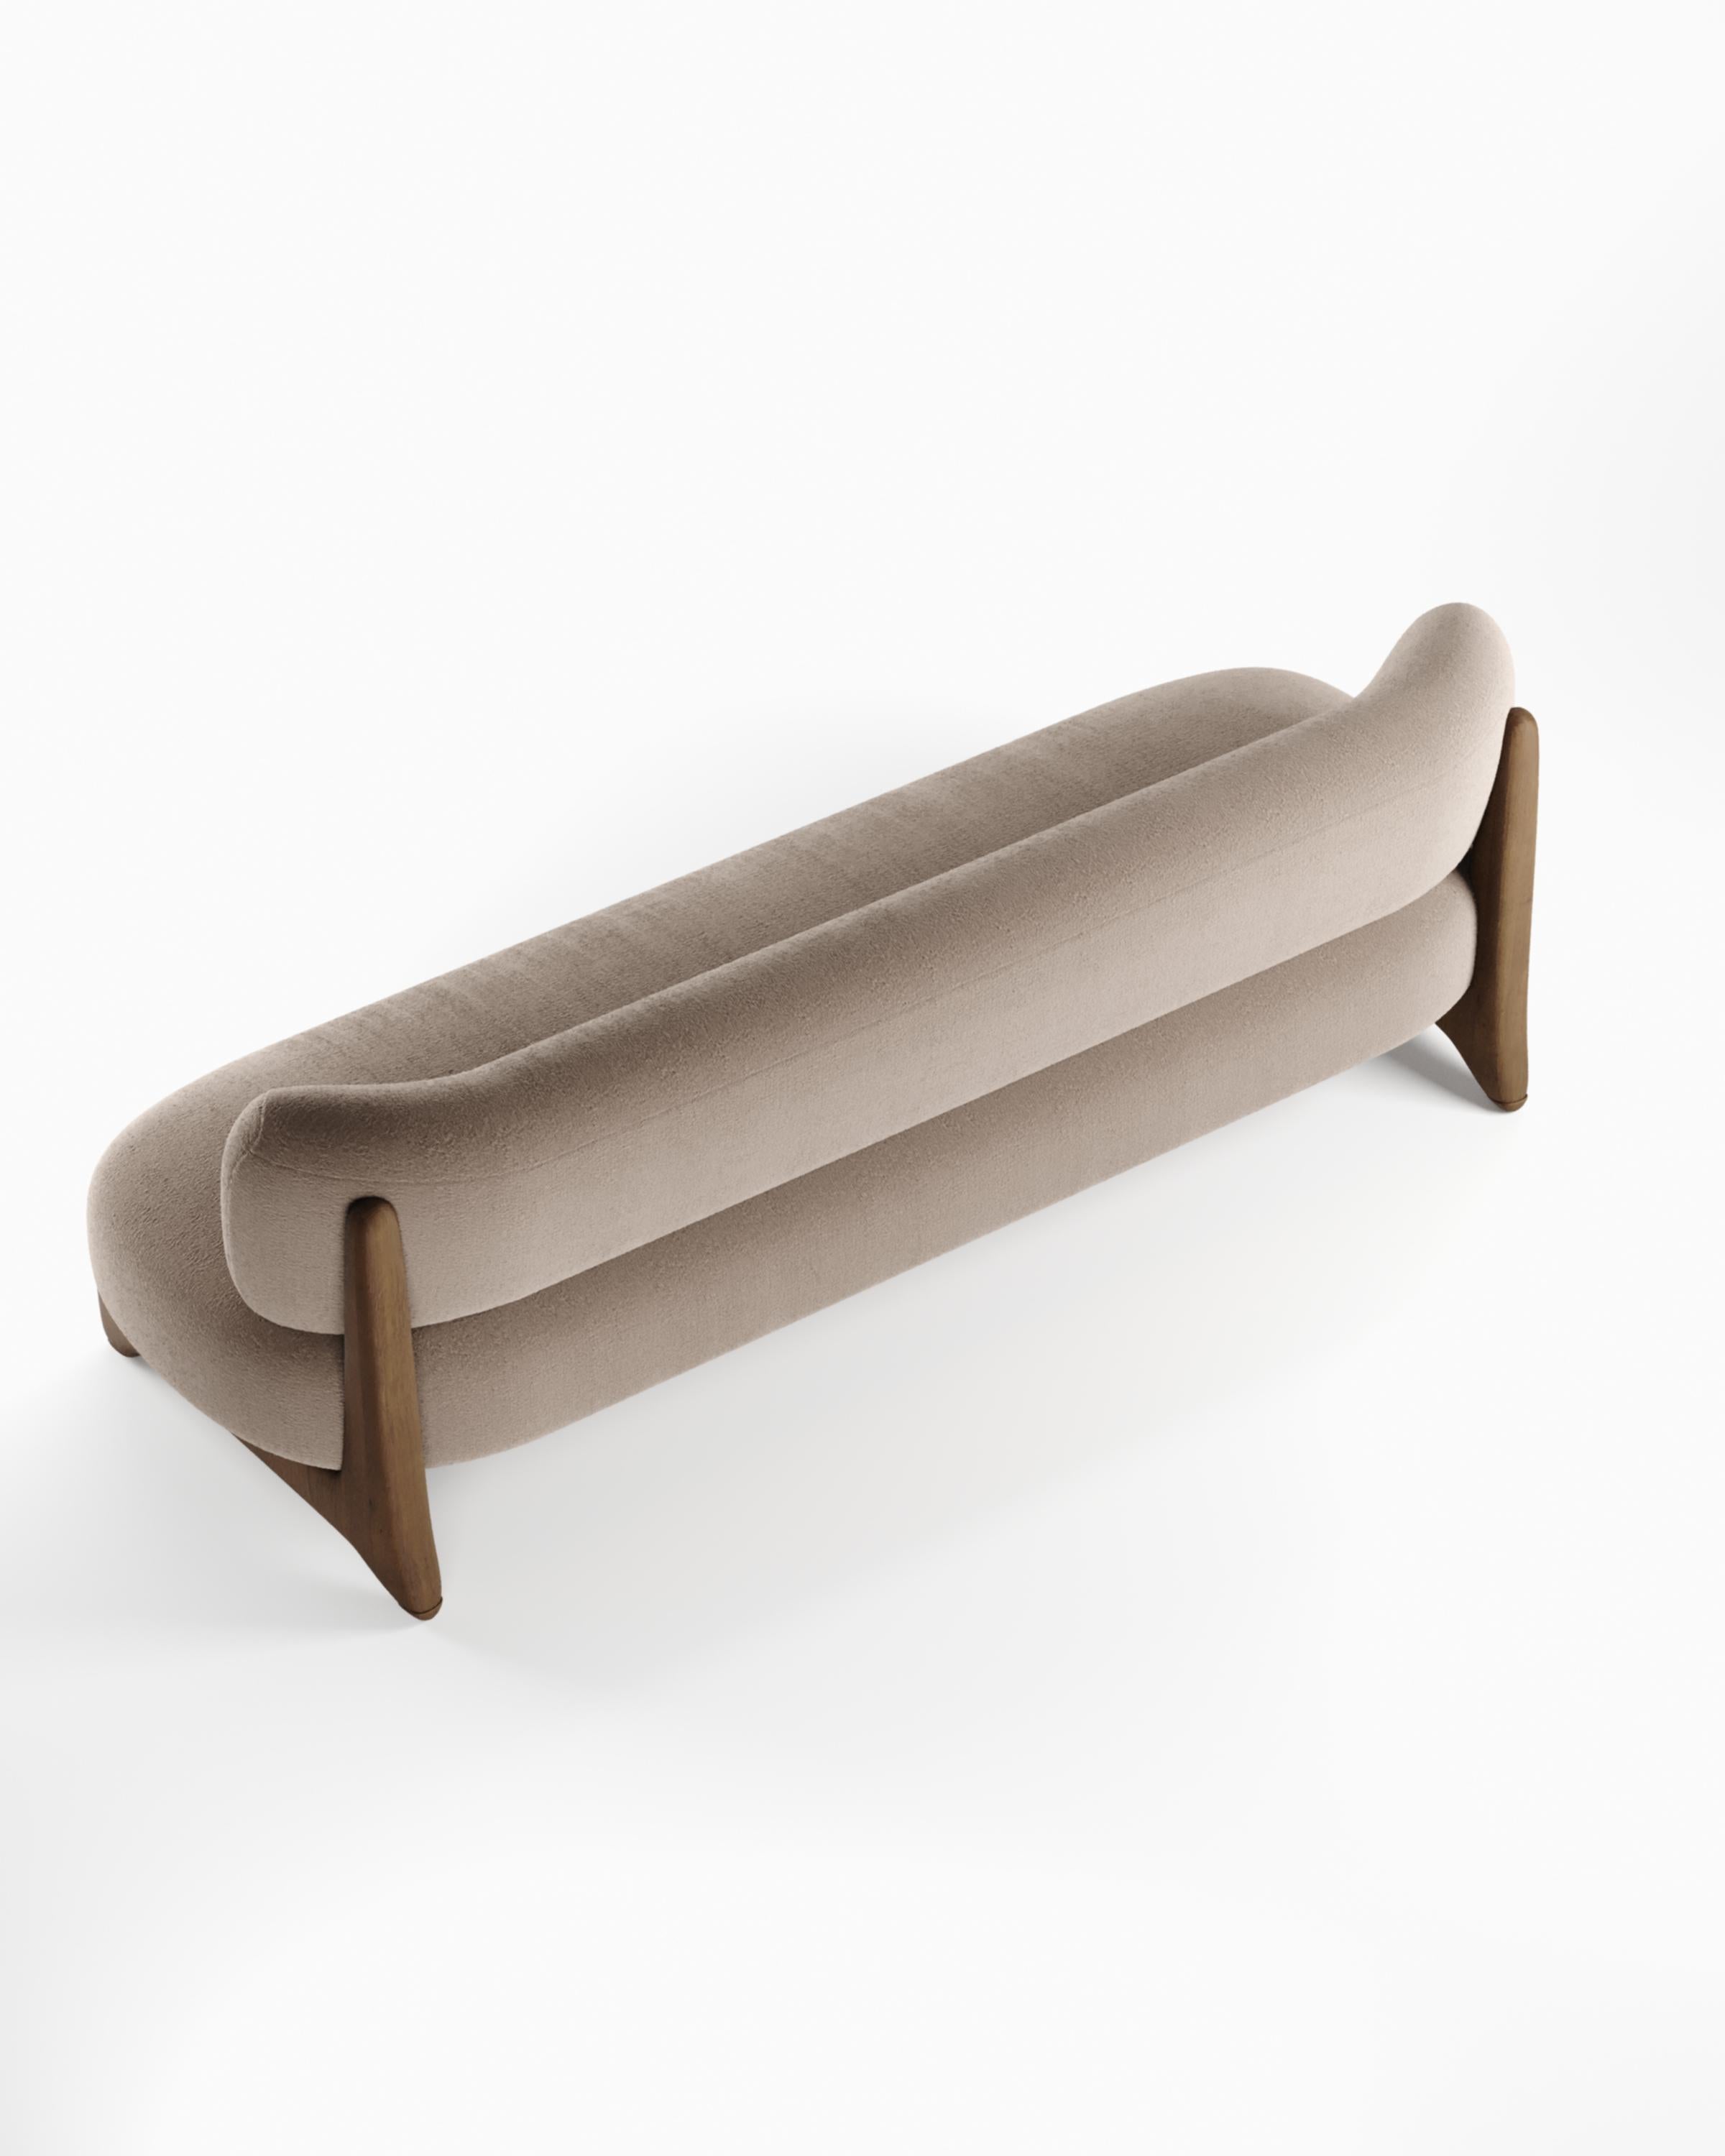 Contemporary Modern Tobo Sofa in Fabric & Oak Wood by Alter Ego for Collector Studio.

Underpinned by a minimalist and sophistication aesthetic of clean lines.


Product options

Upholstery:
Available in all collector wood swatches.

Woods